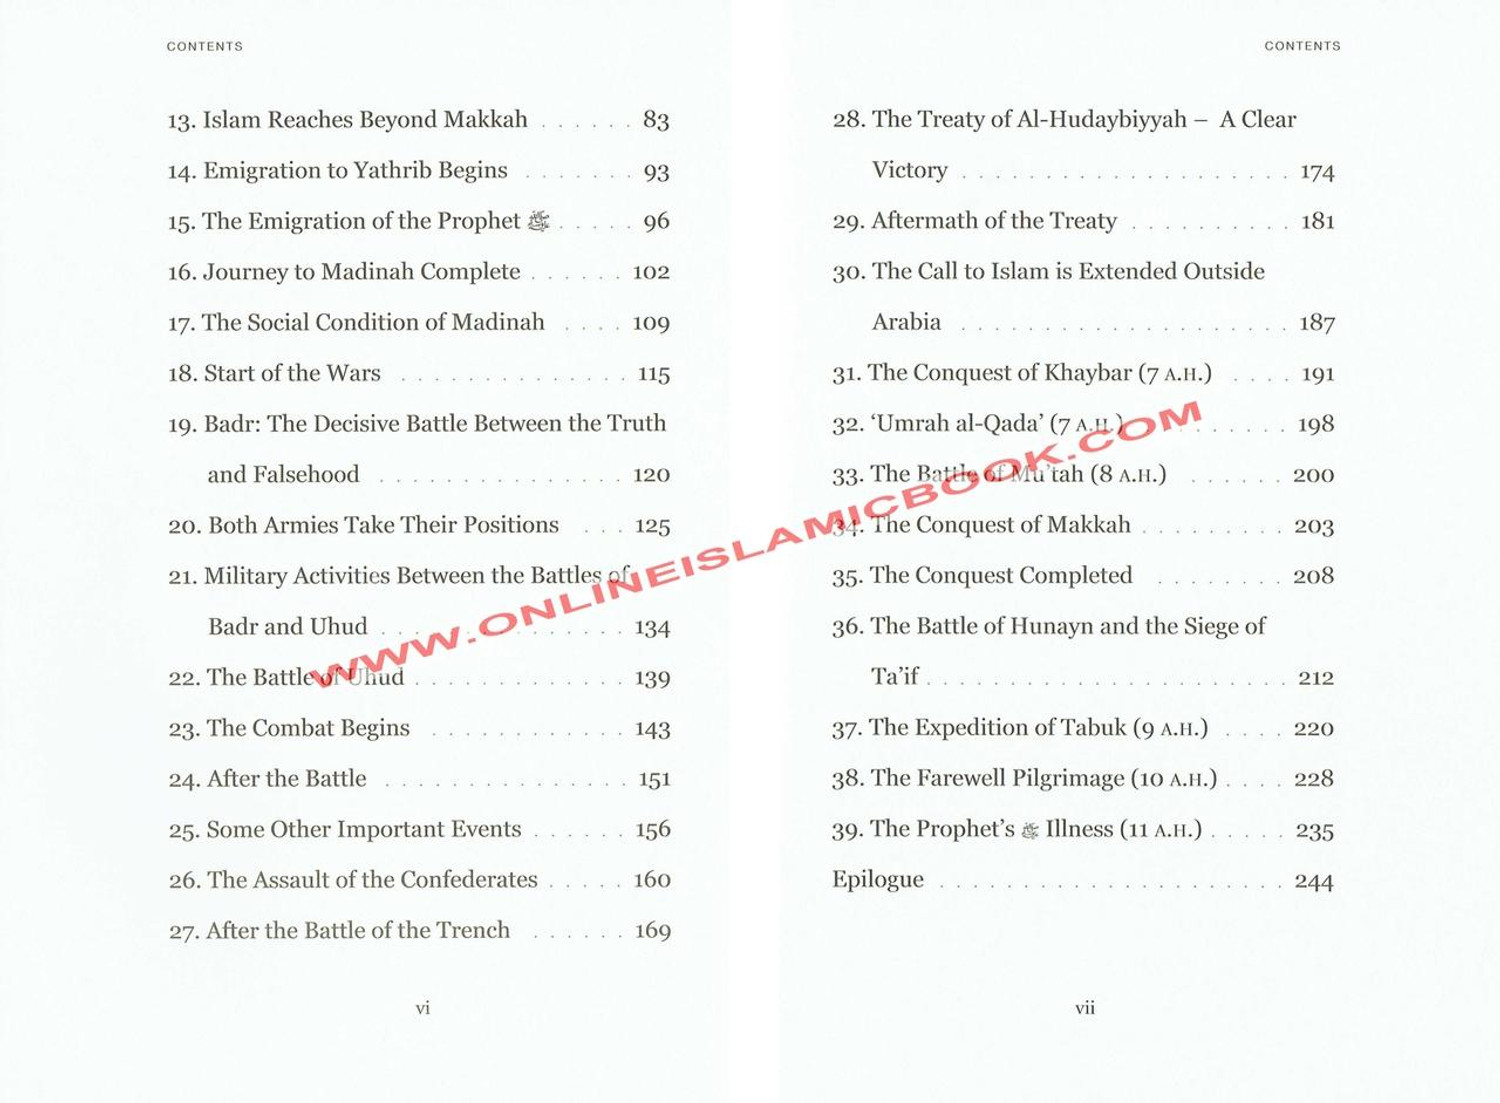 table of contents the prophet